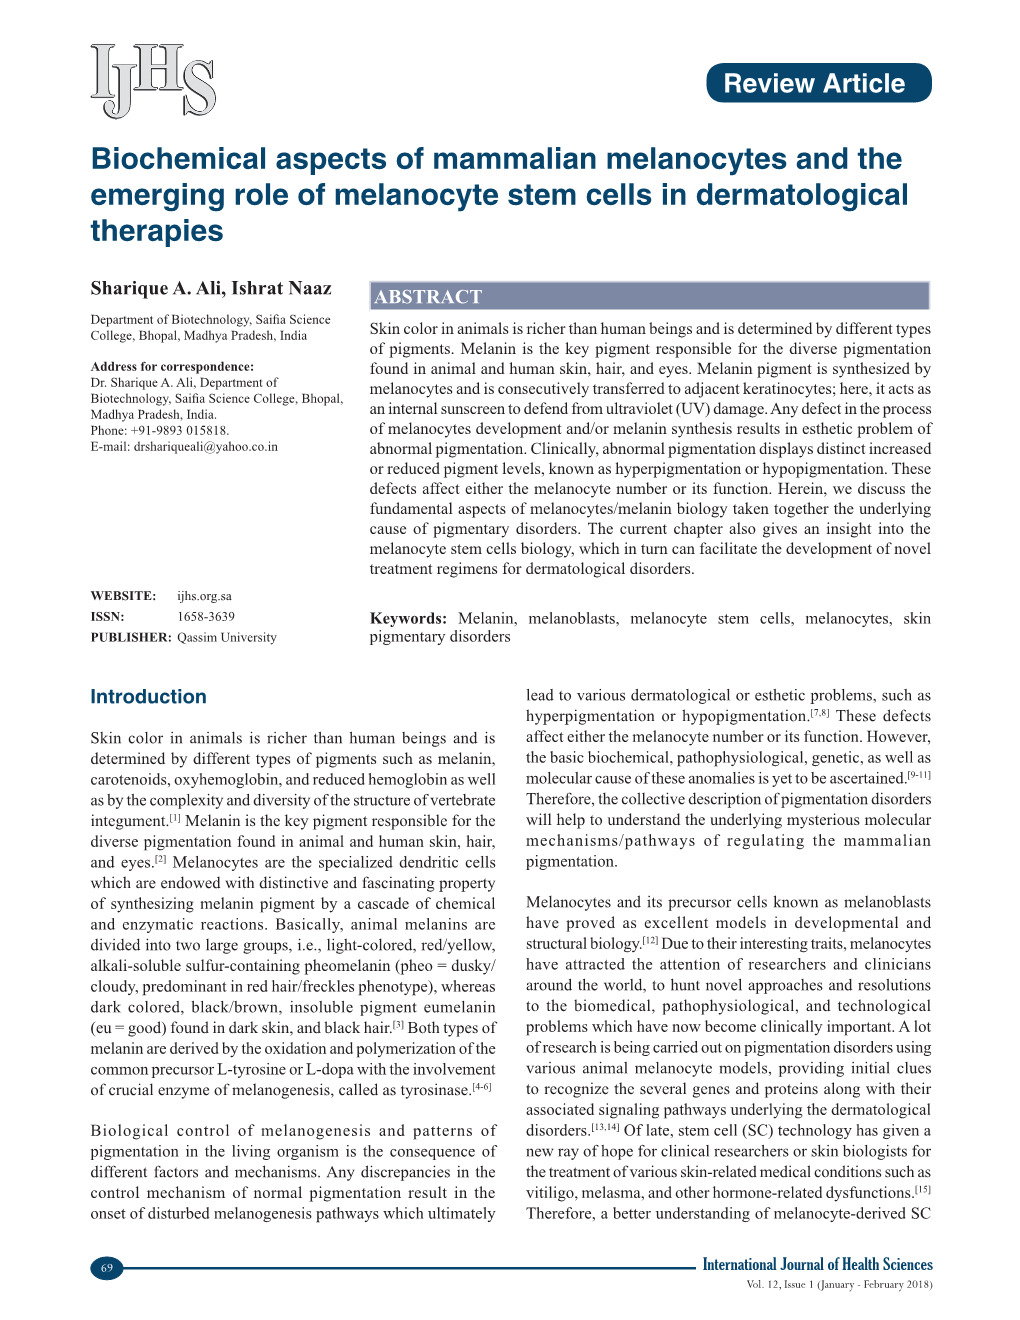 Biochemical Aspects of Mammalian Melanocytes and the Emerging Role of Melanocyte Stem Cells in Dermatological Therapies